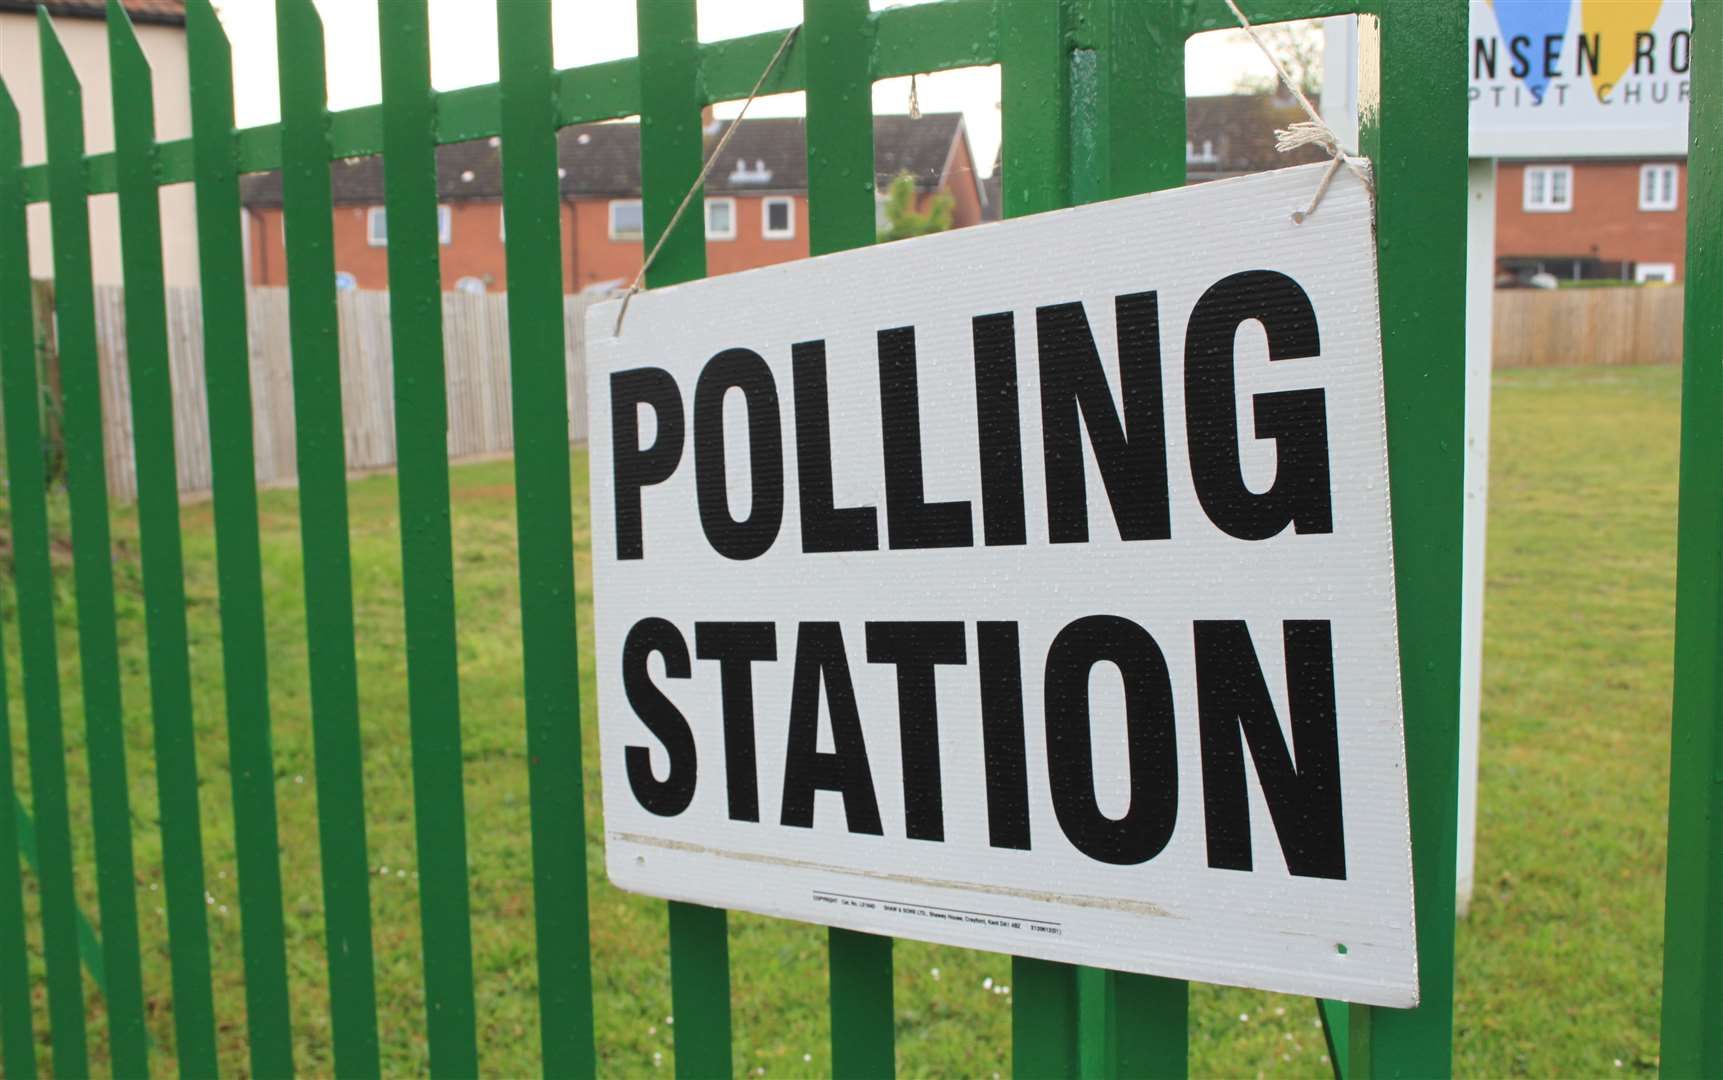 Many people across the Towns have not received their postal votes, but the council says there is still time to ensure they can vote